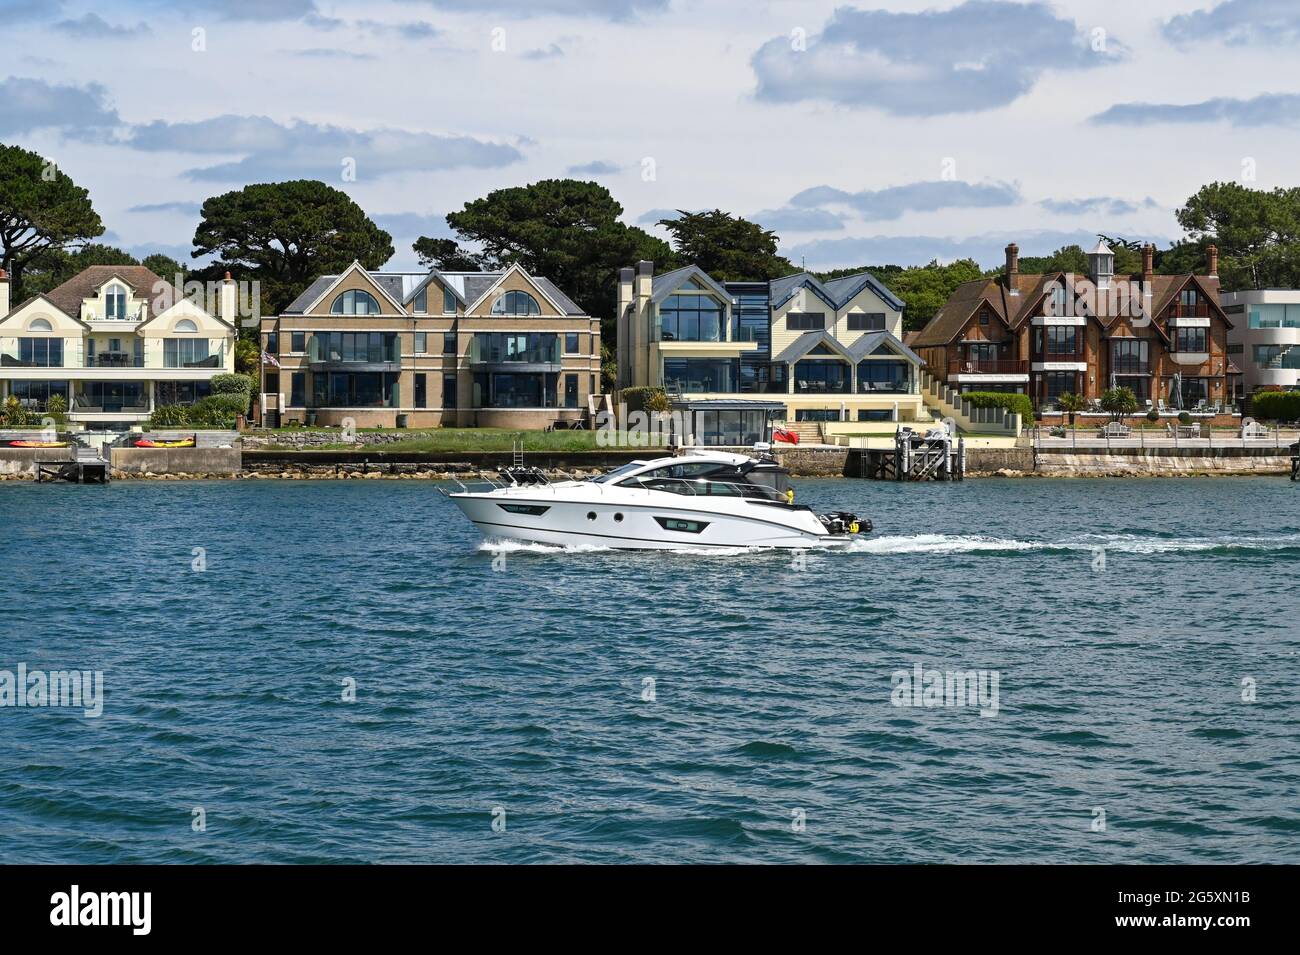 Poole, England - June 2021: Motorboat sailing past houses on the waterfront in the Sandbanks areas of Poole Stock Photo